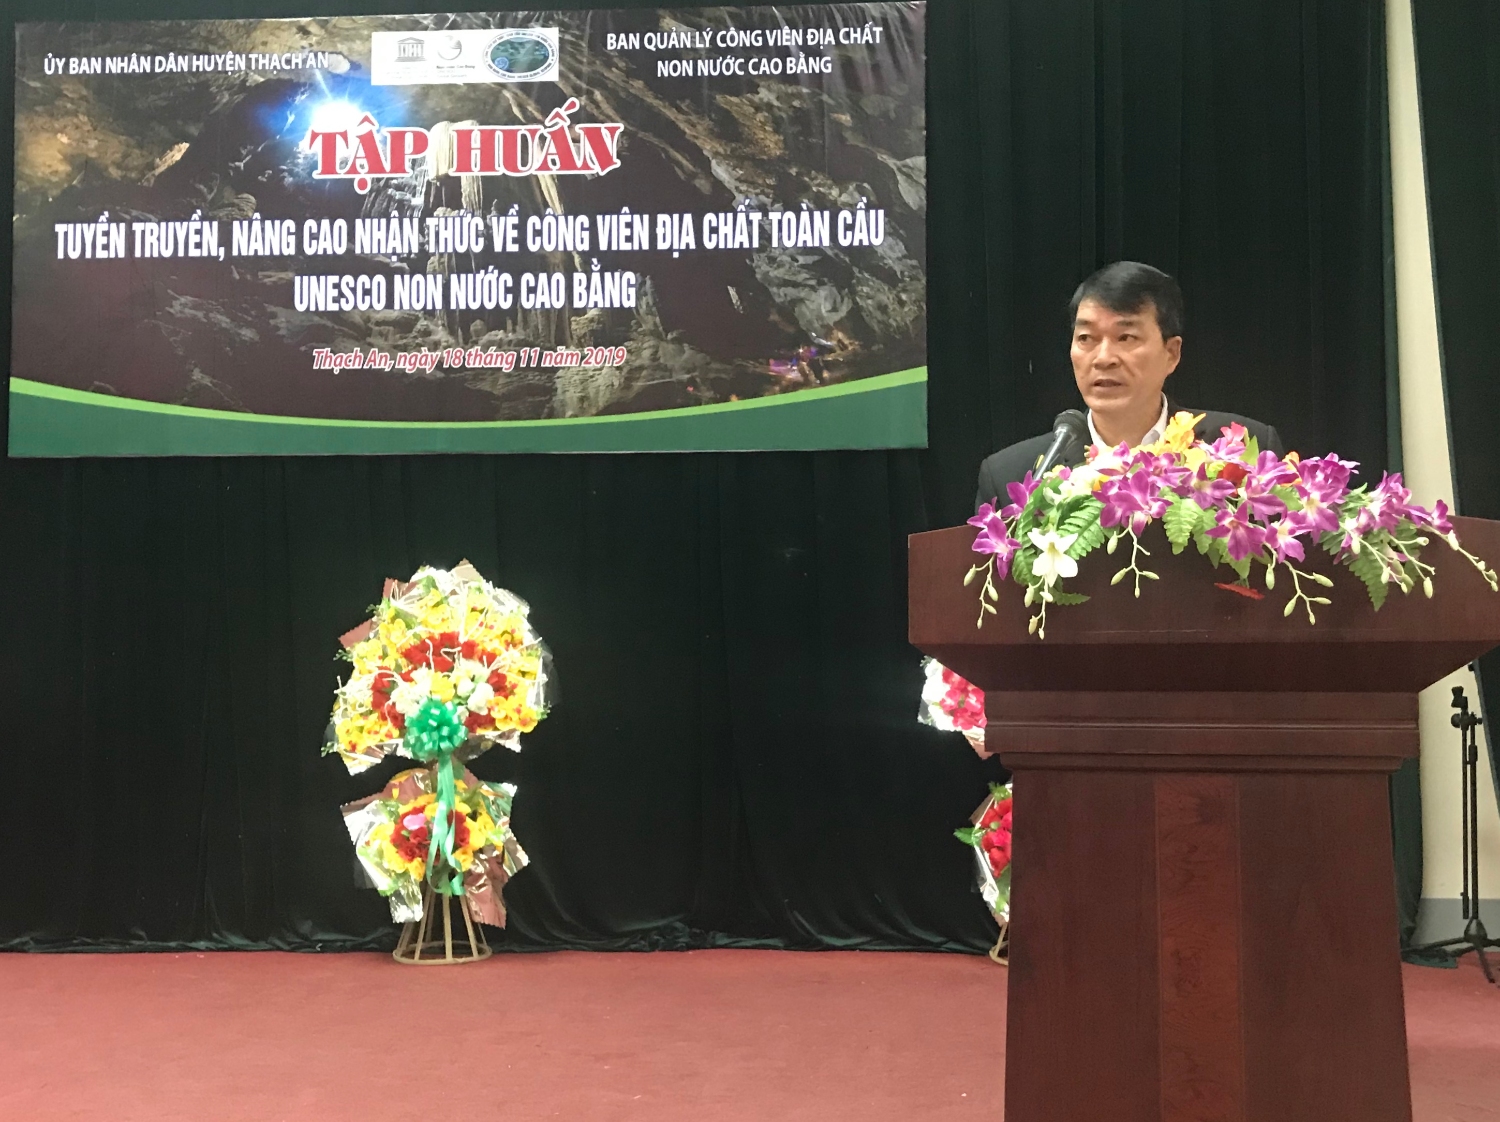 Mr. Ngo The Manh, Vice Chairman of Thạch An People’s committee delivered an opening remarks.